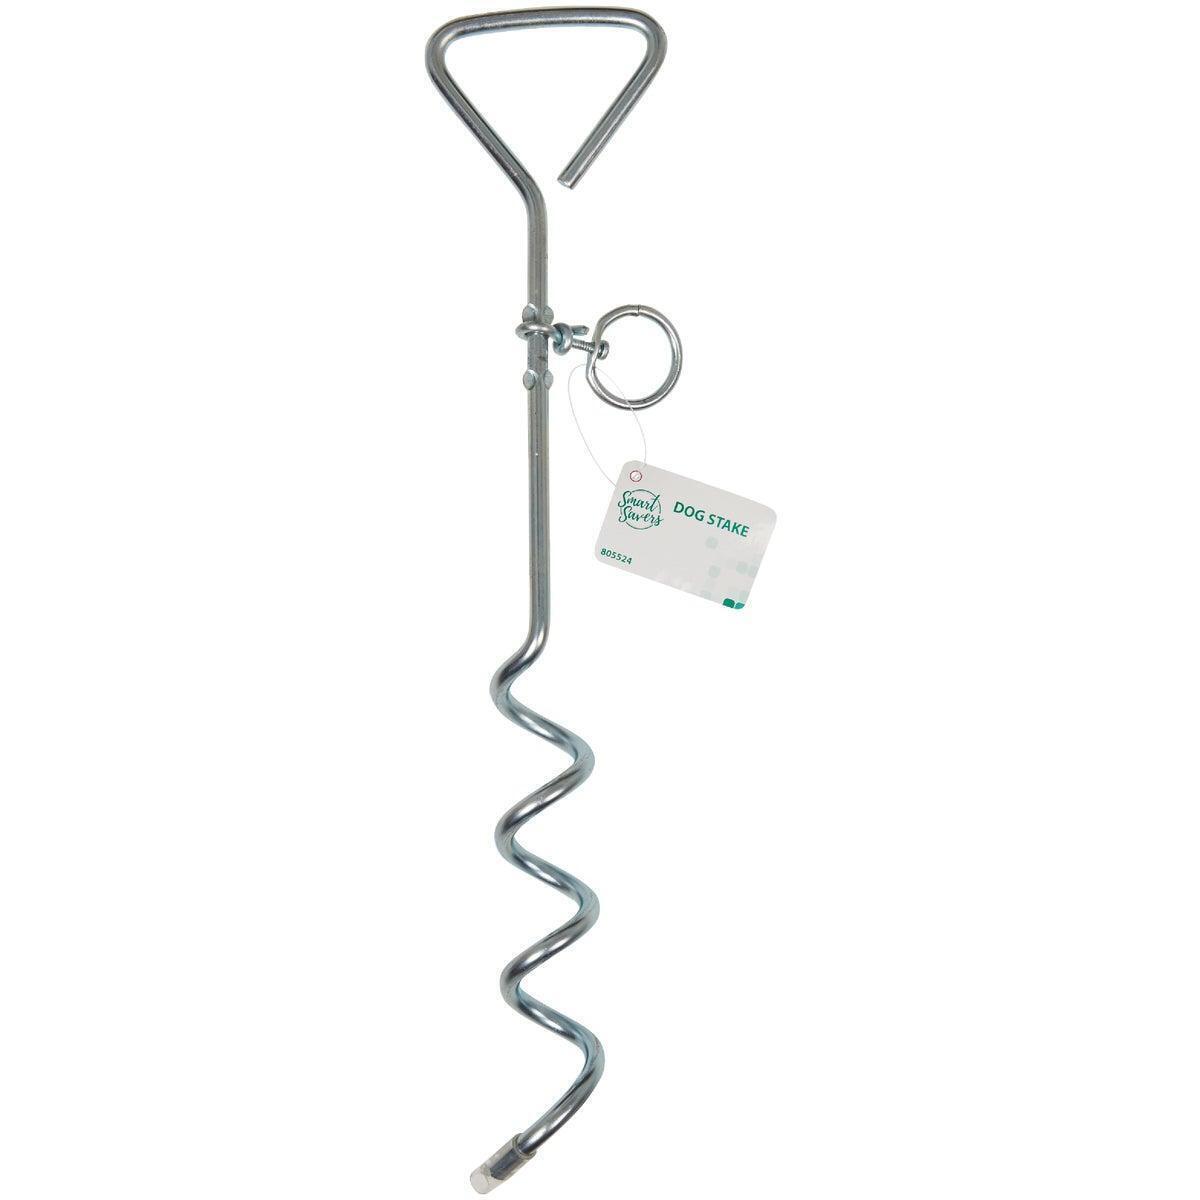 Smart Savers 15.75 In. Corkscrew Iron Dog Tie-Out Stake 10034 Pack of 12